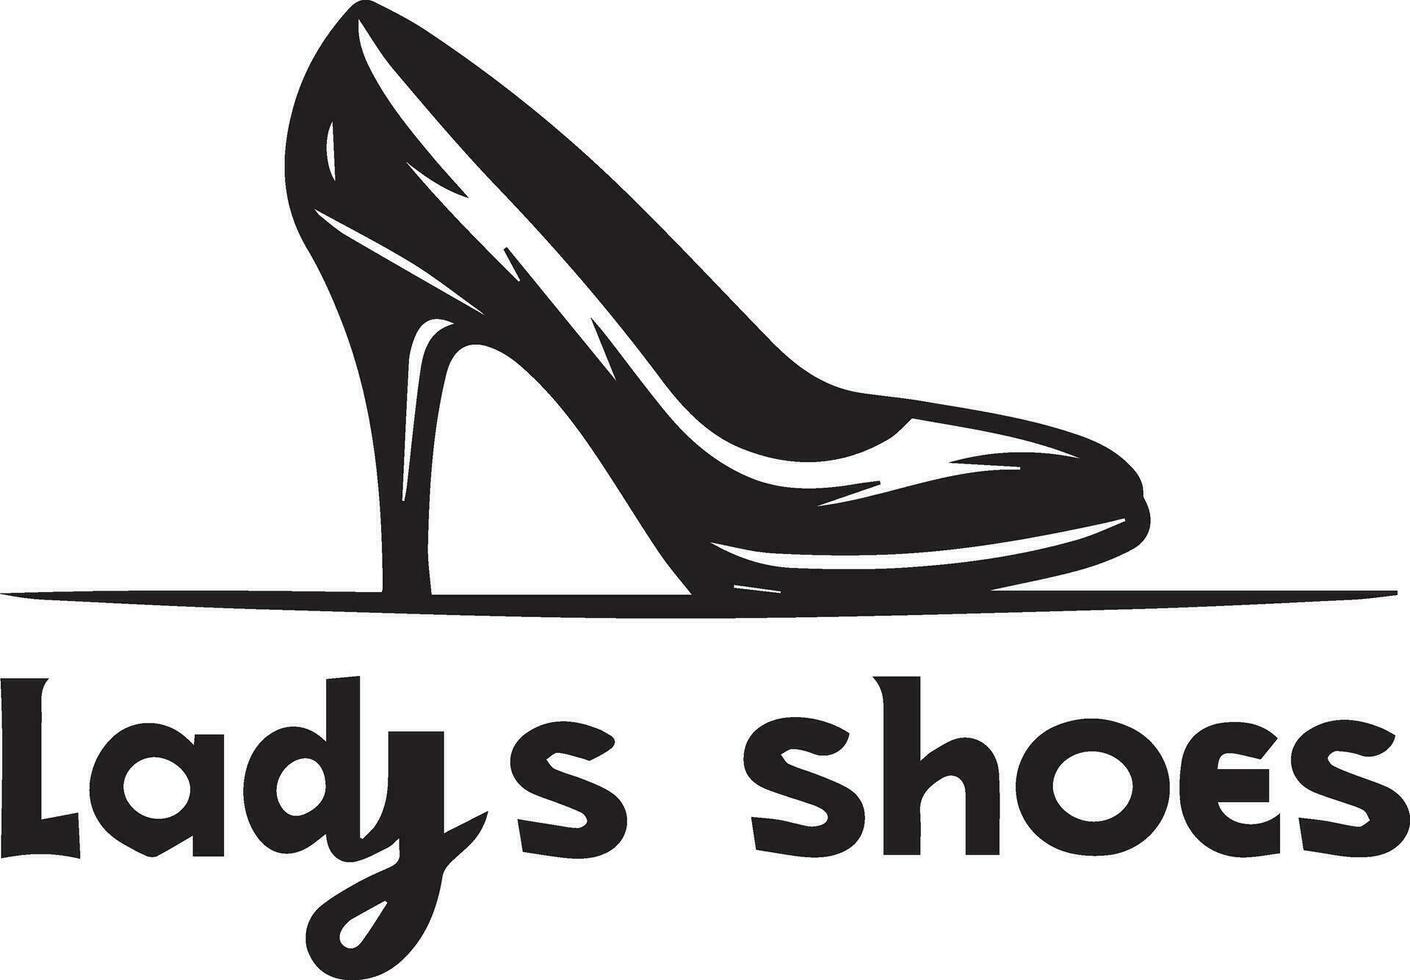 Ladys shoes vector silhouette 8